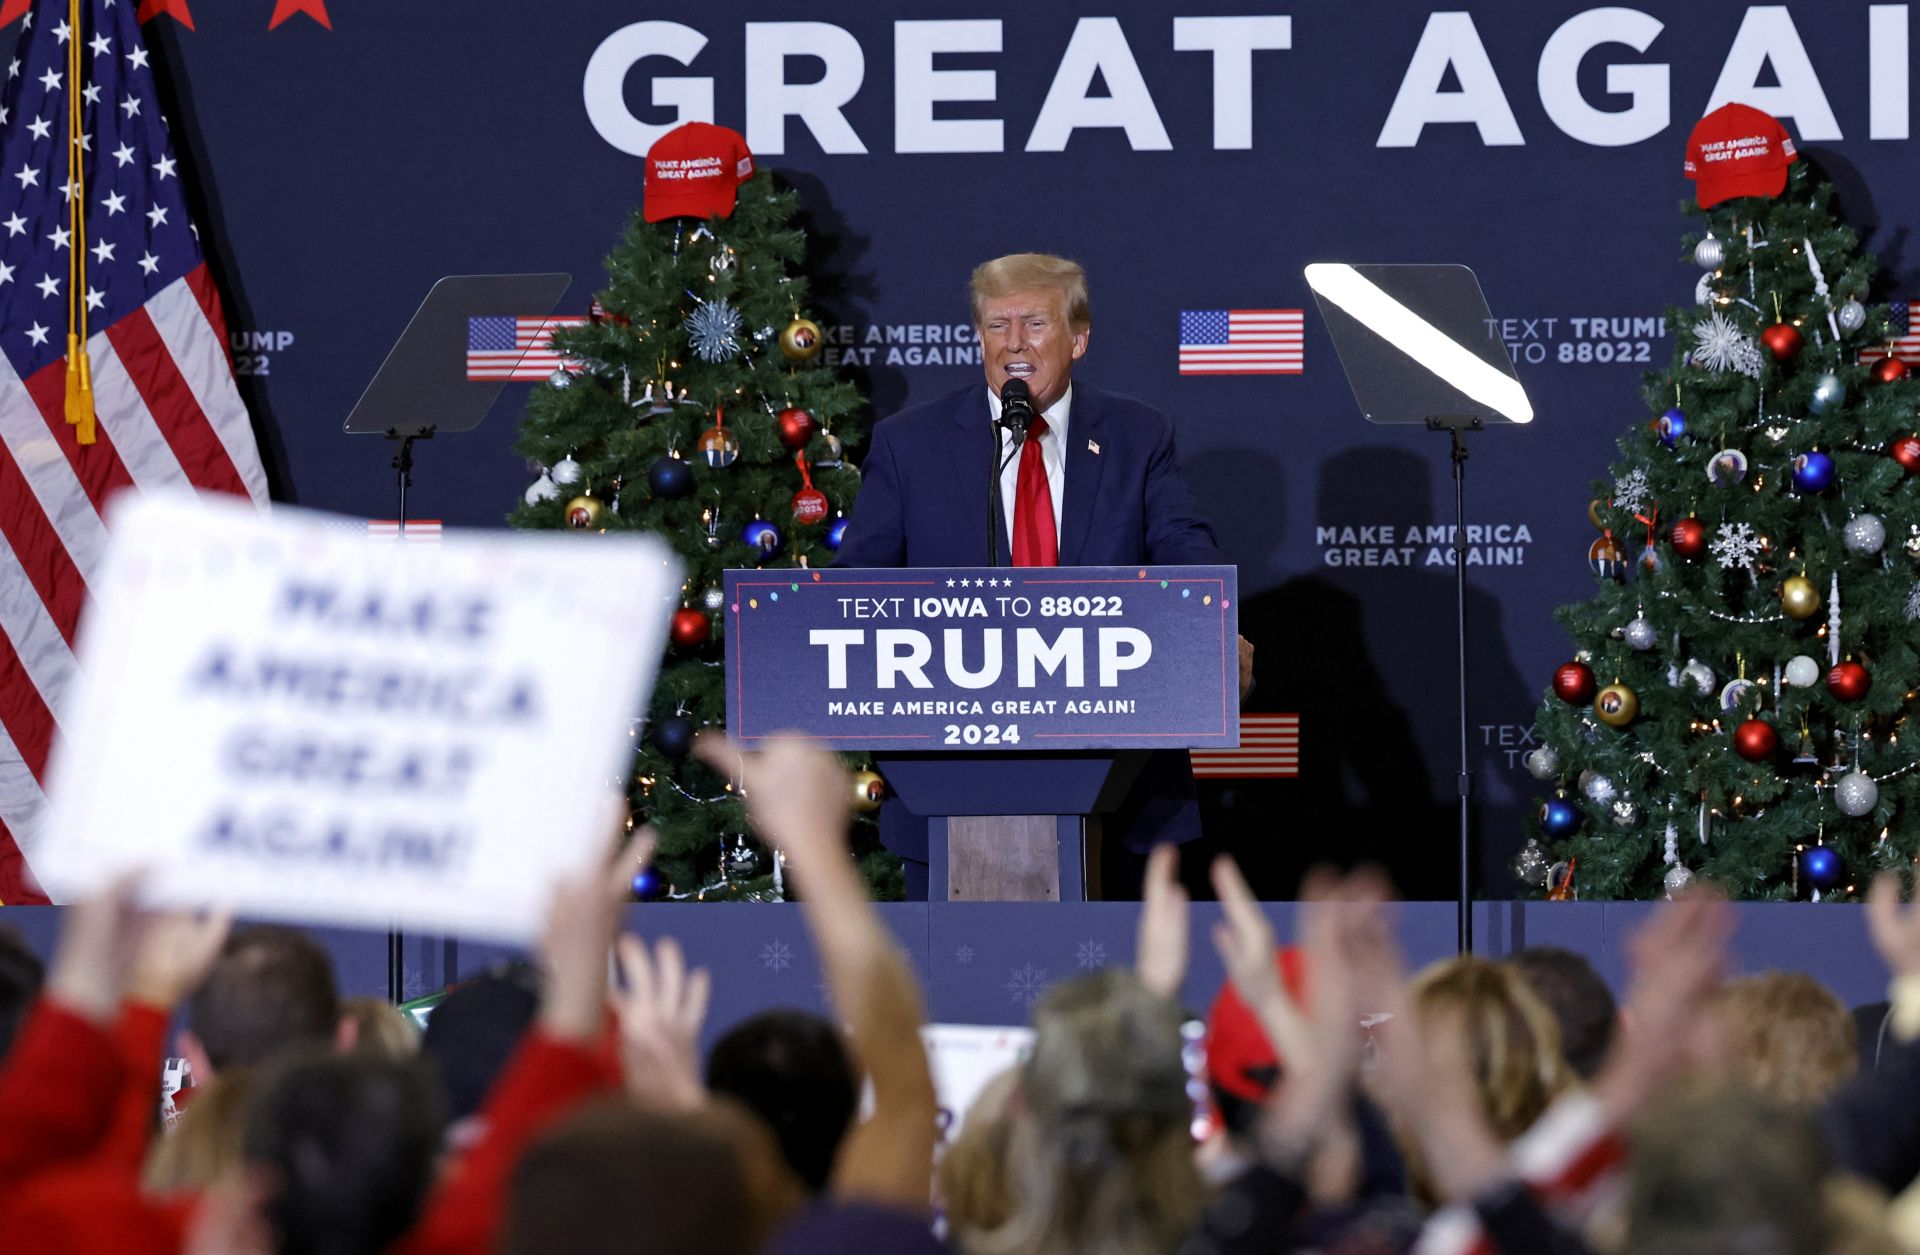 Former U.S. president and 2024 presidential hopeful Donald Trump speaks during a campaign event in Waterloo, Iowa, on Dec. 19, 2023. That same day, a Colorado court ruled Trump could not appear on the state's presidential primary ballot due to his involvement in the U.S. Capitol riot in January 2021. 